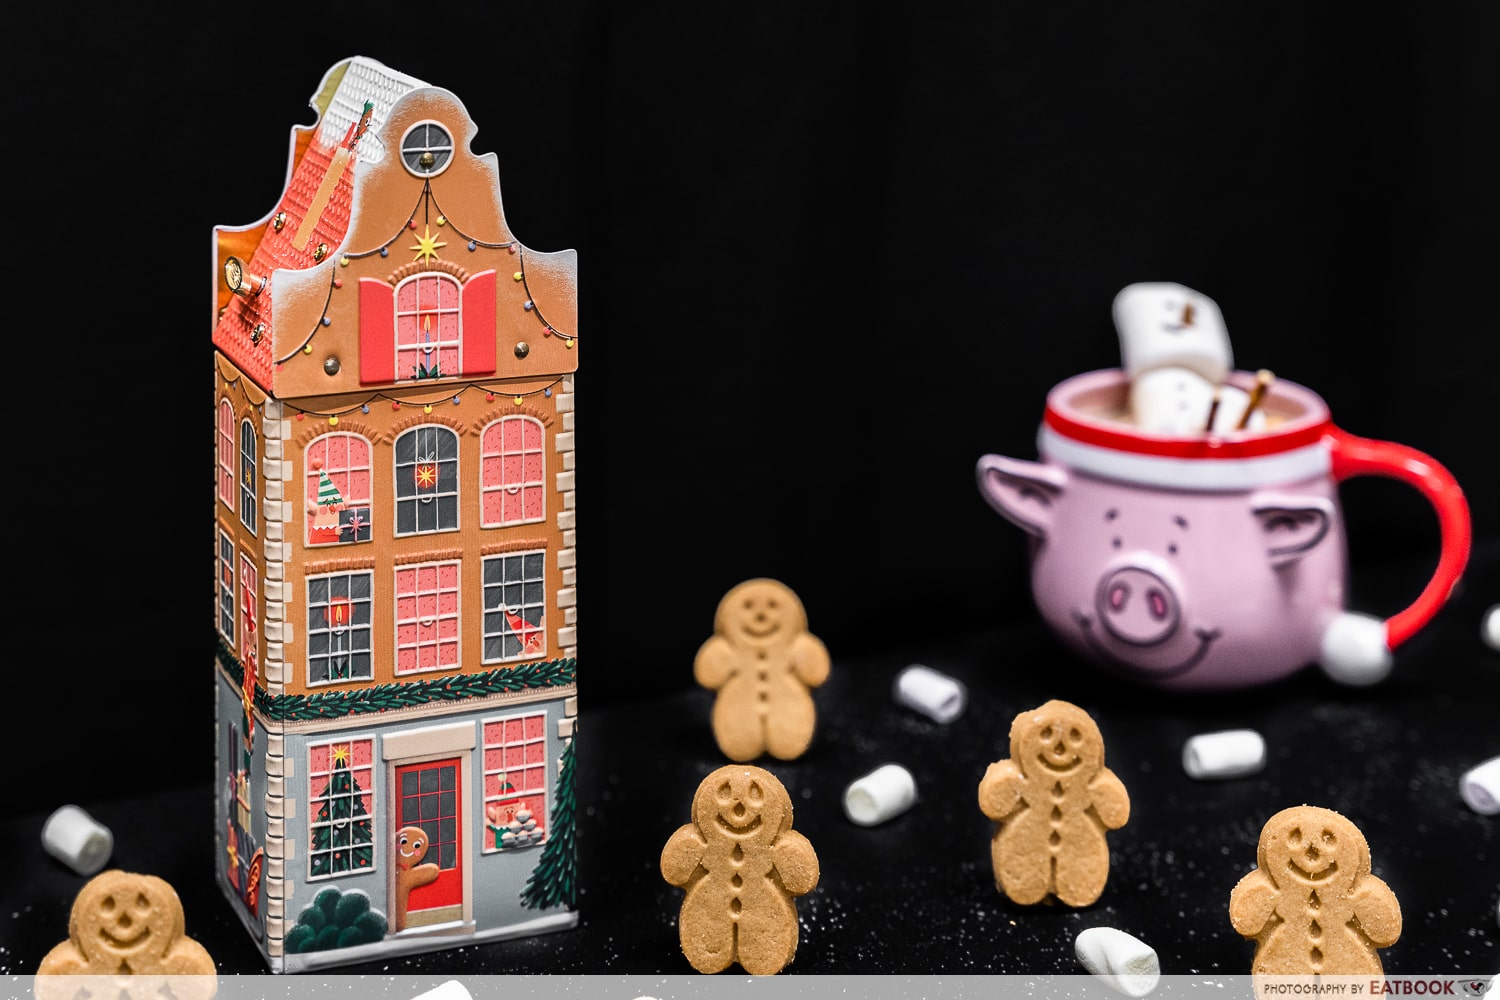 M&S Magical Gingerbread Musical House